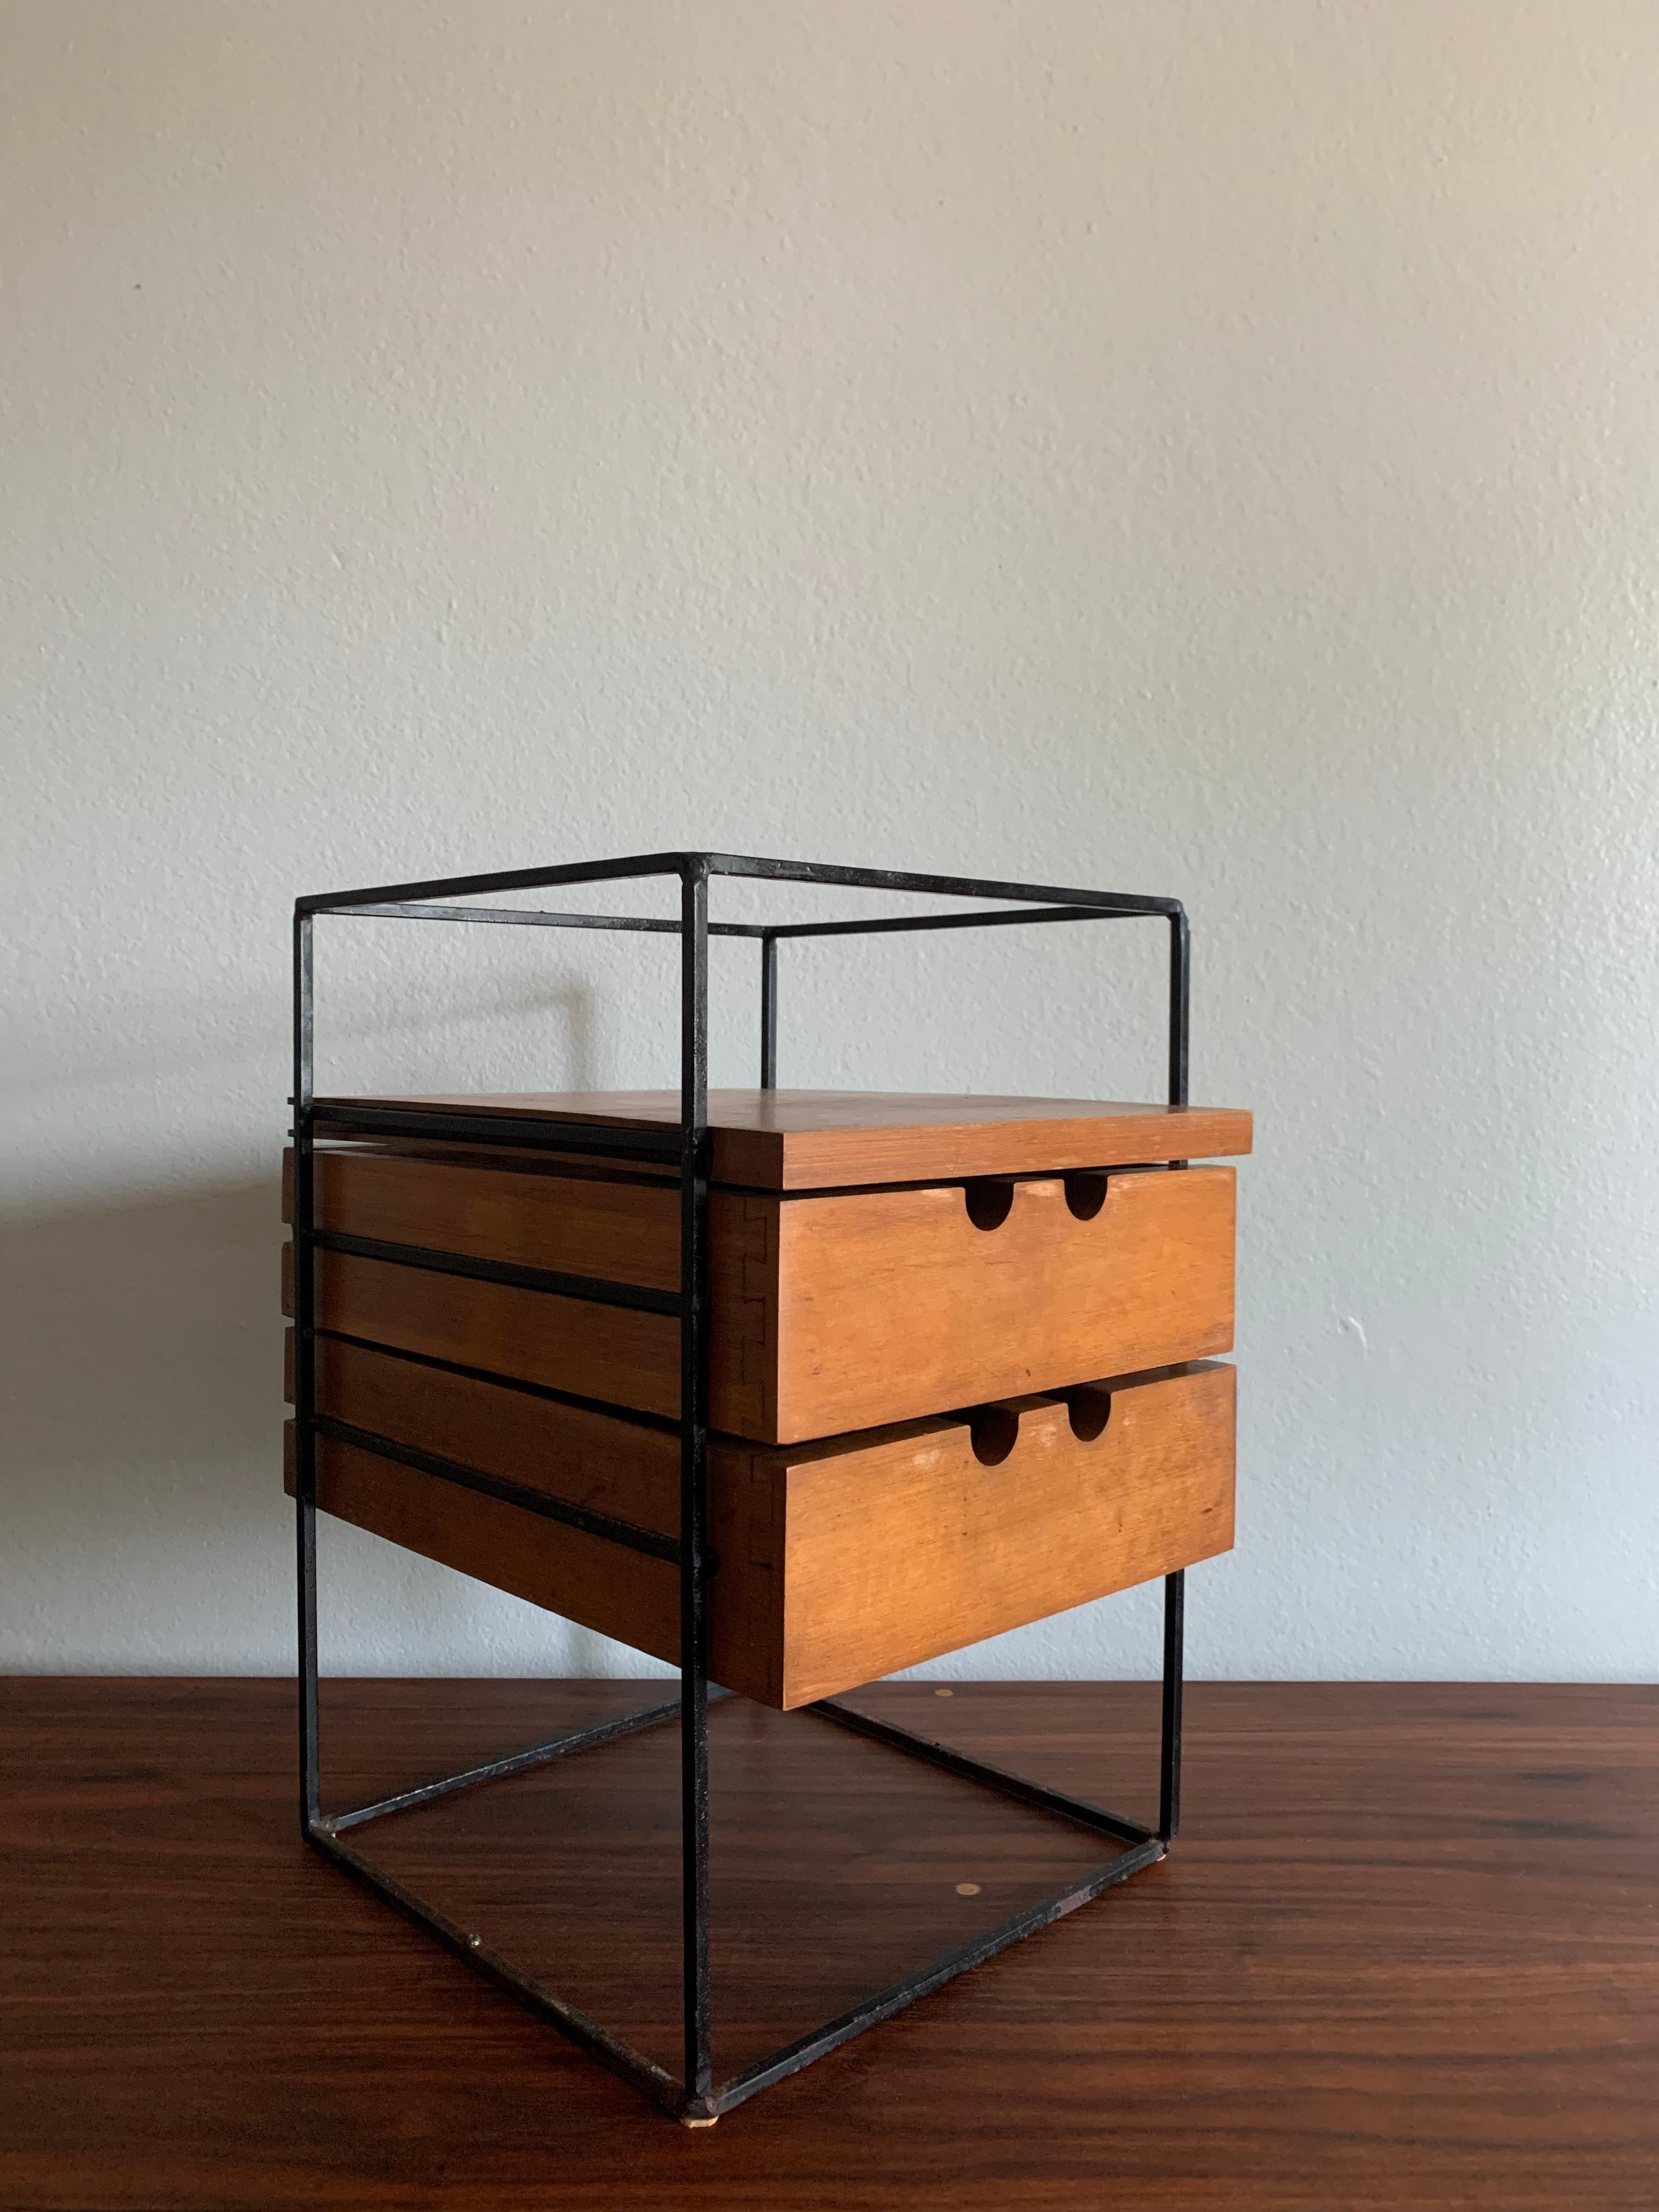 Paul McCobb Planner group desk organizer by Winchendon Furniture. Made in the 1950s.